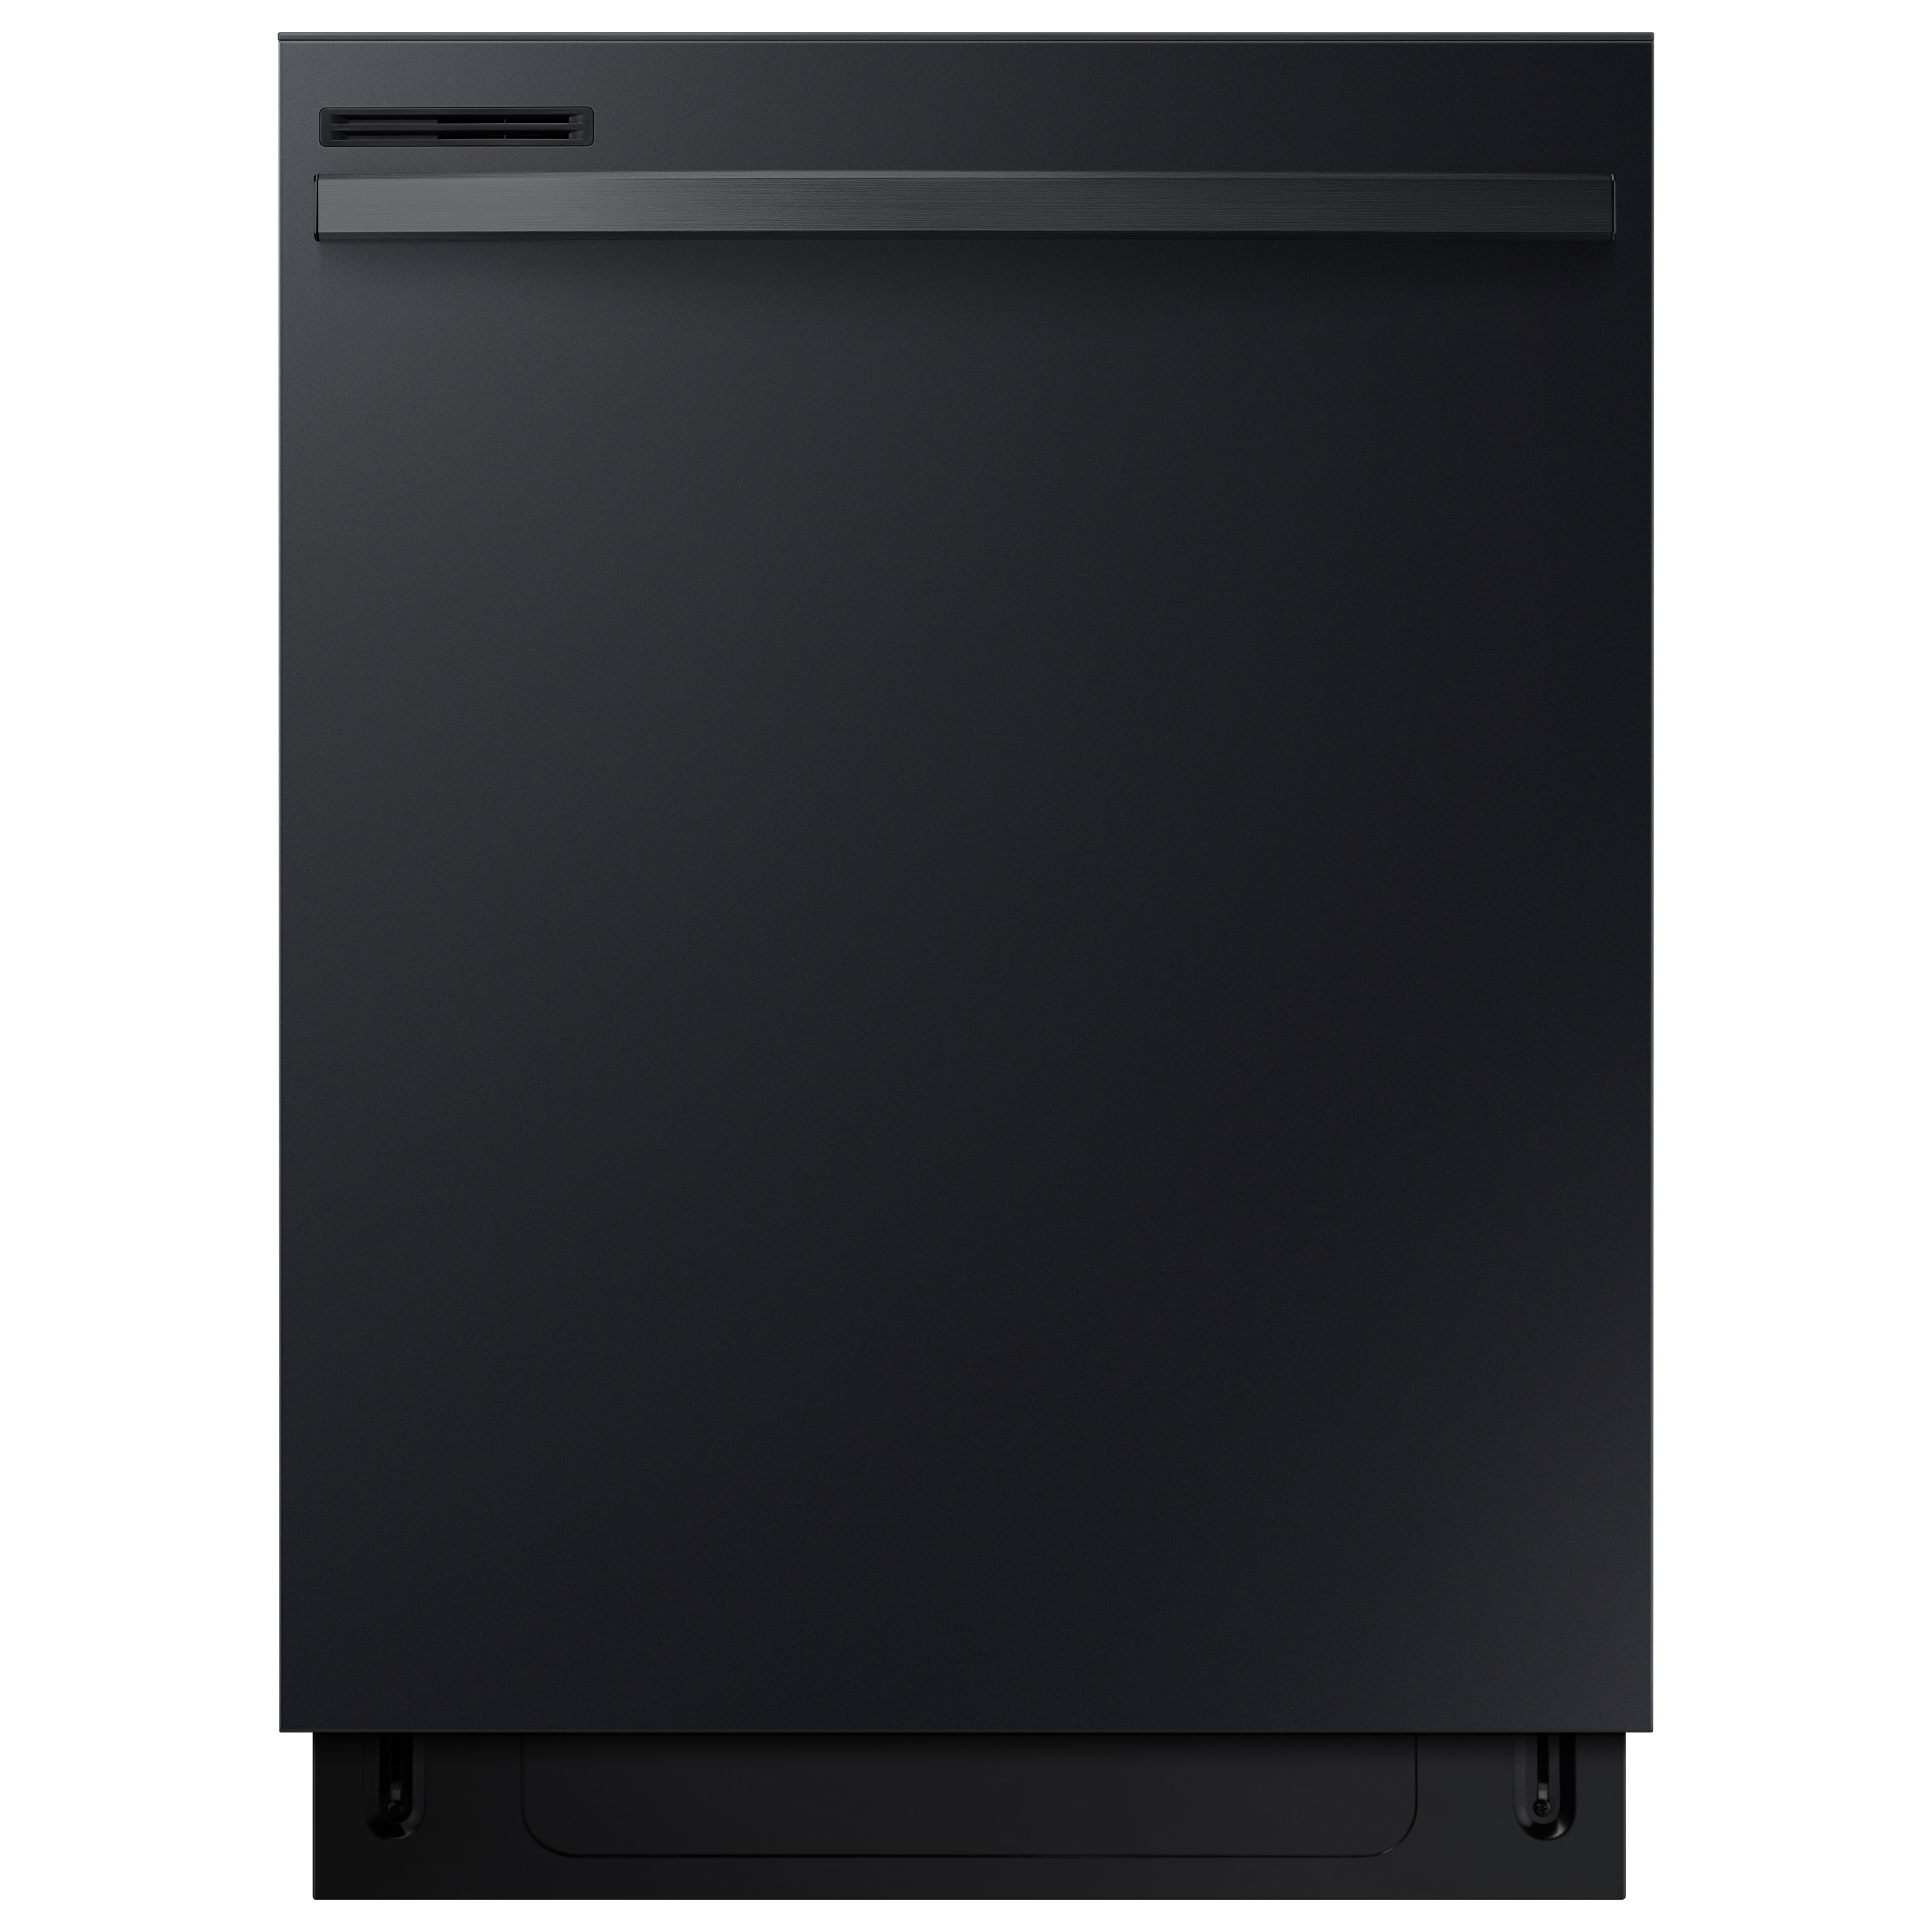 Is There A Recall On Samsung Dishwashers